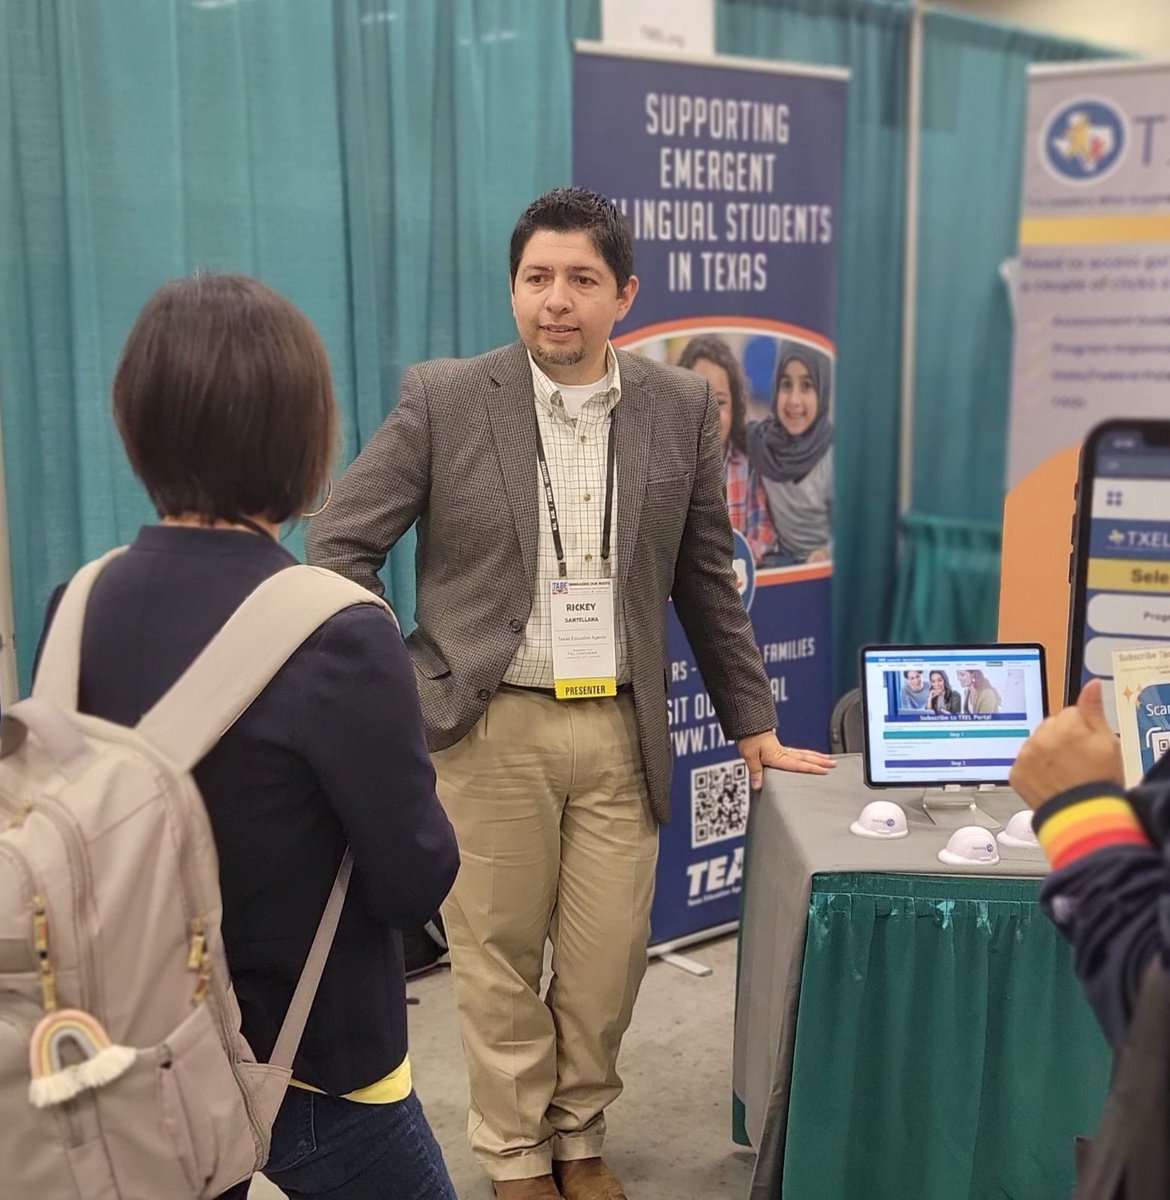 Thank you to everyone who visited our exhibitor booth at TABE 2023! Your interest in the TXEL portal and support for emergent bilingual students in Texas means the world to us. Together, we're making a difference in education! 🌟 #TABE2023 #TXEL #EmergentBilinguals  #TEA